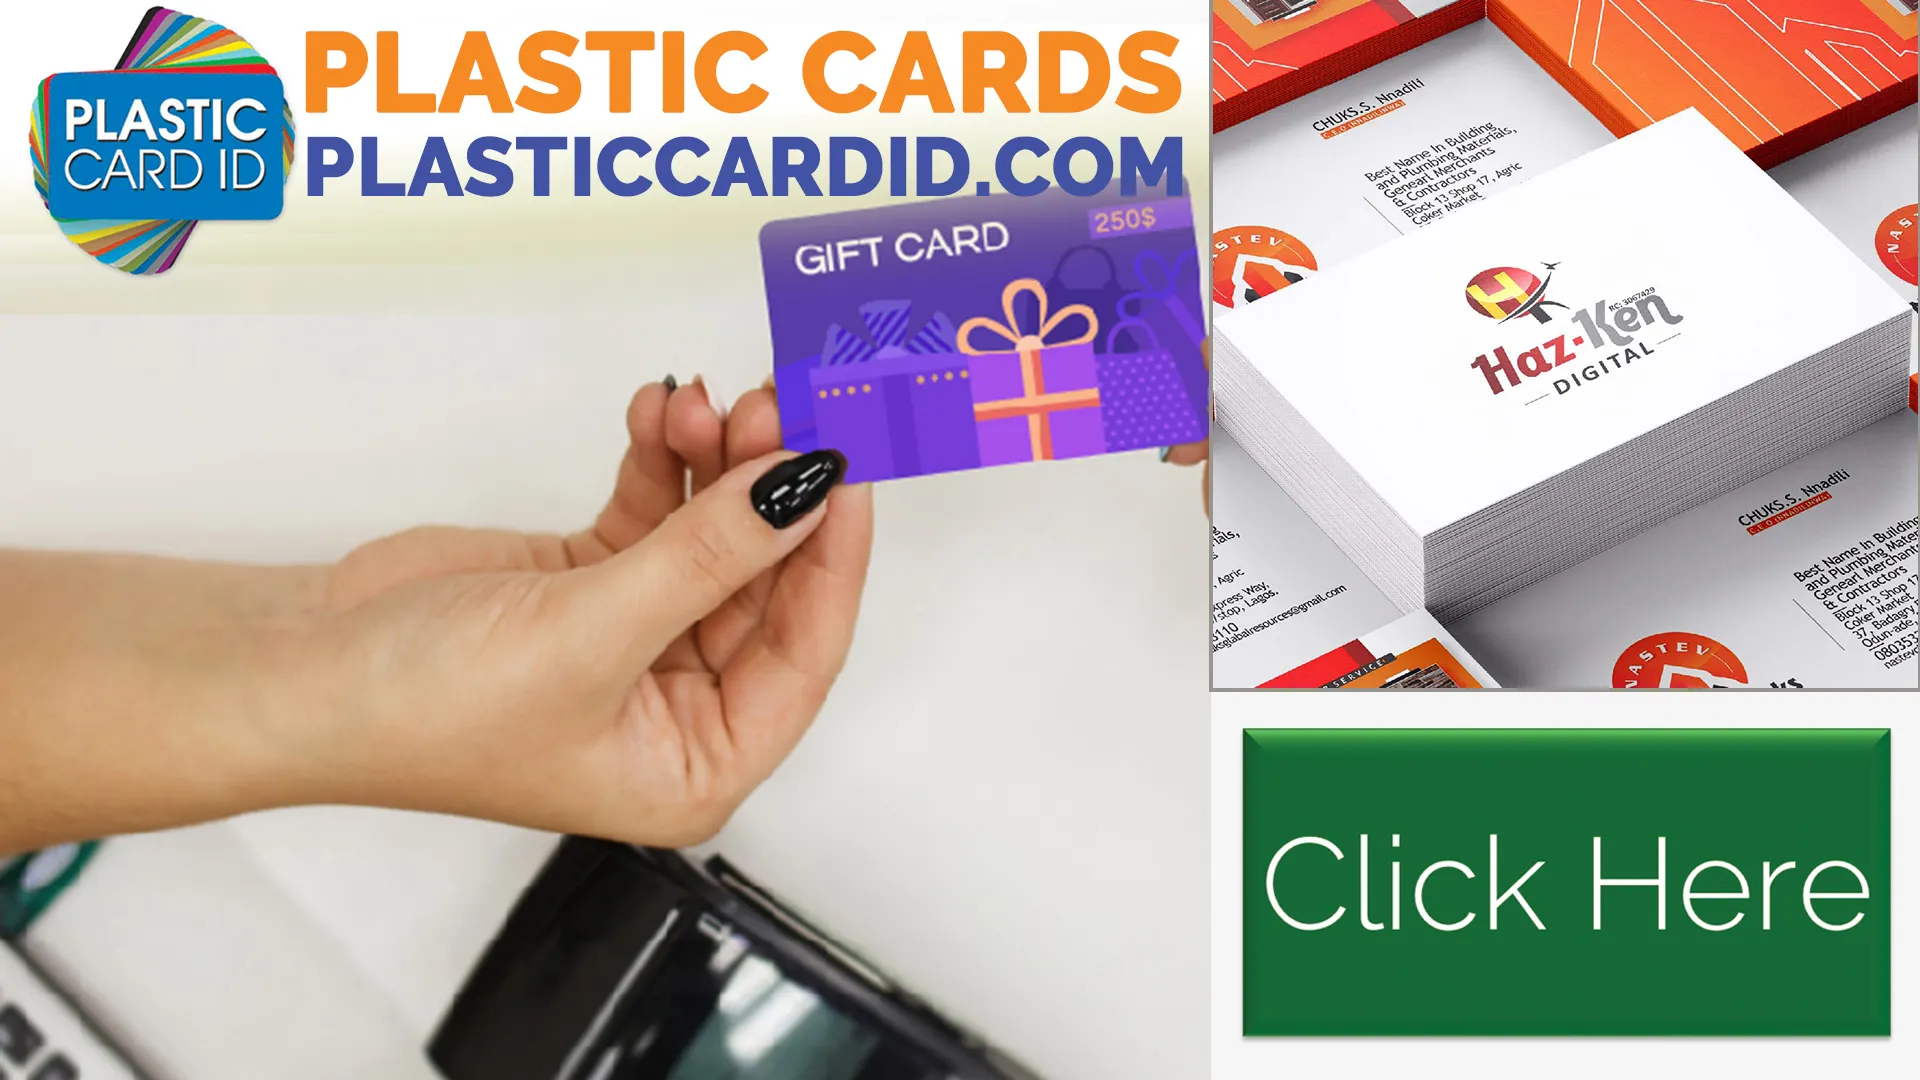 The Business of Cards: Plastic Cards in the Professional Sphere